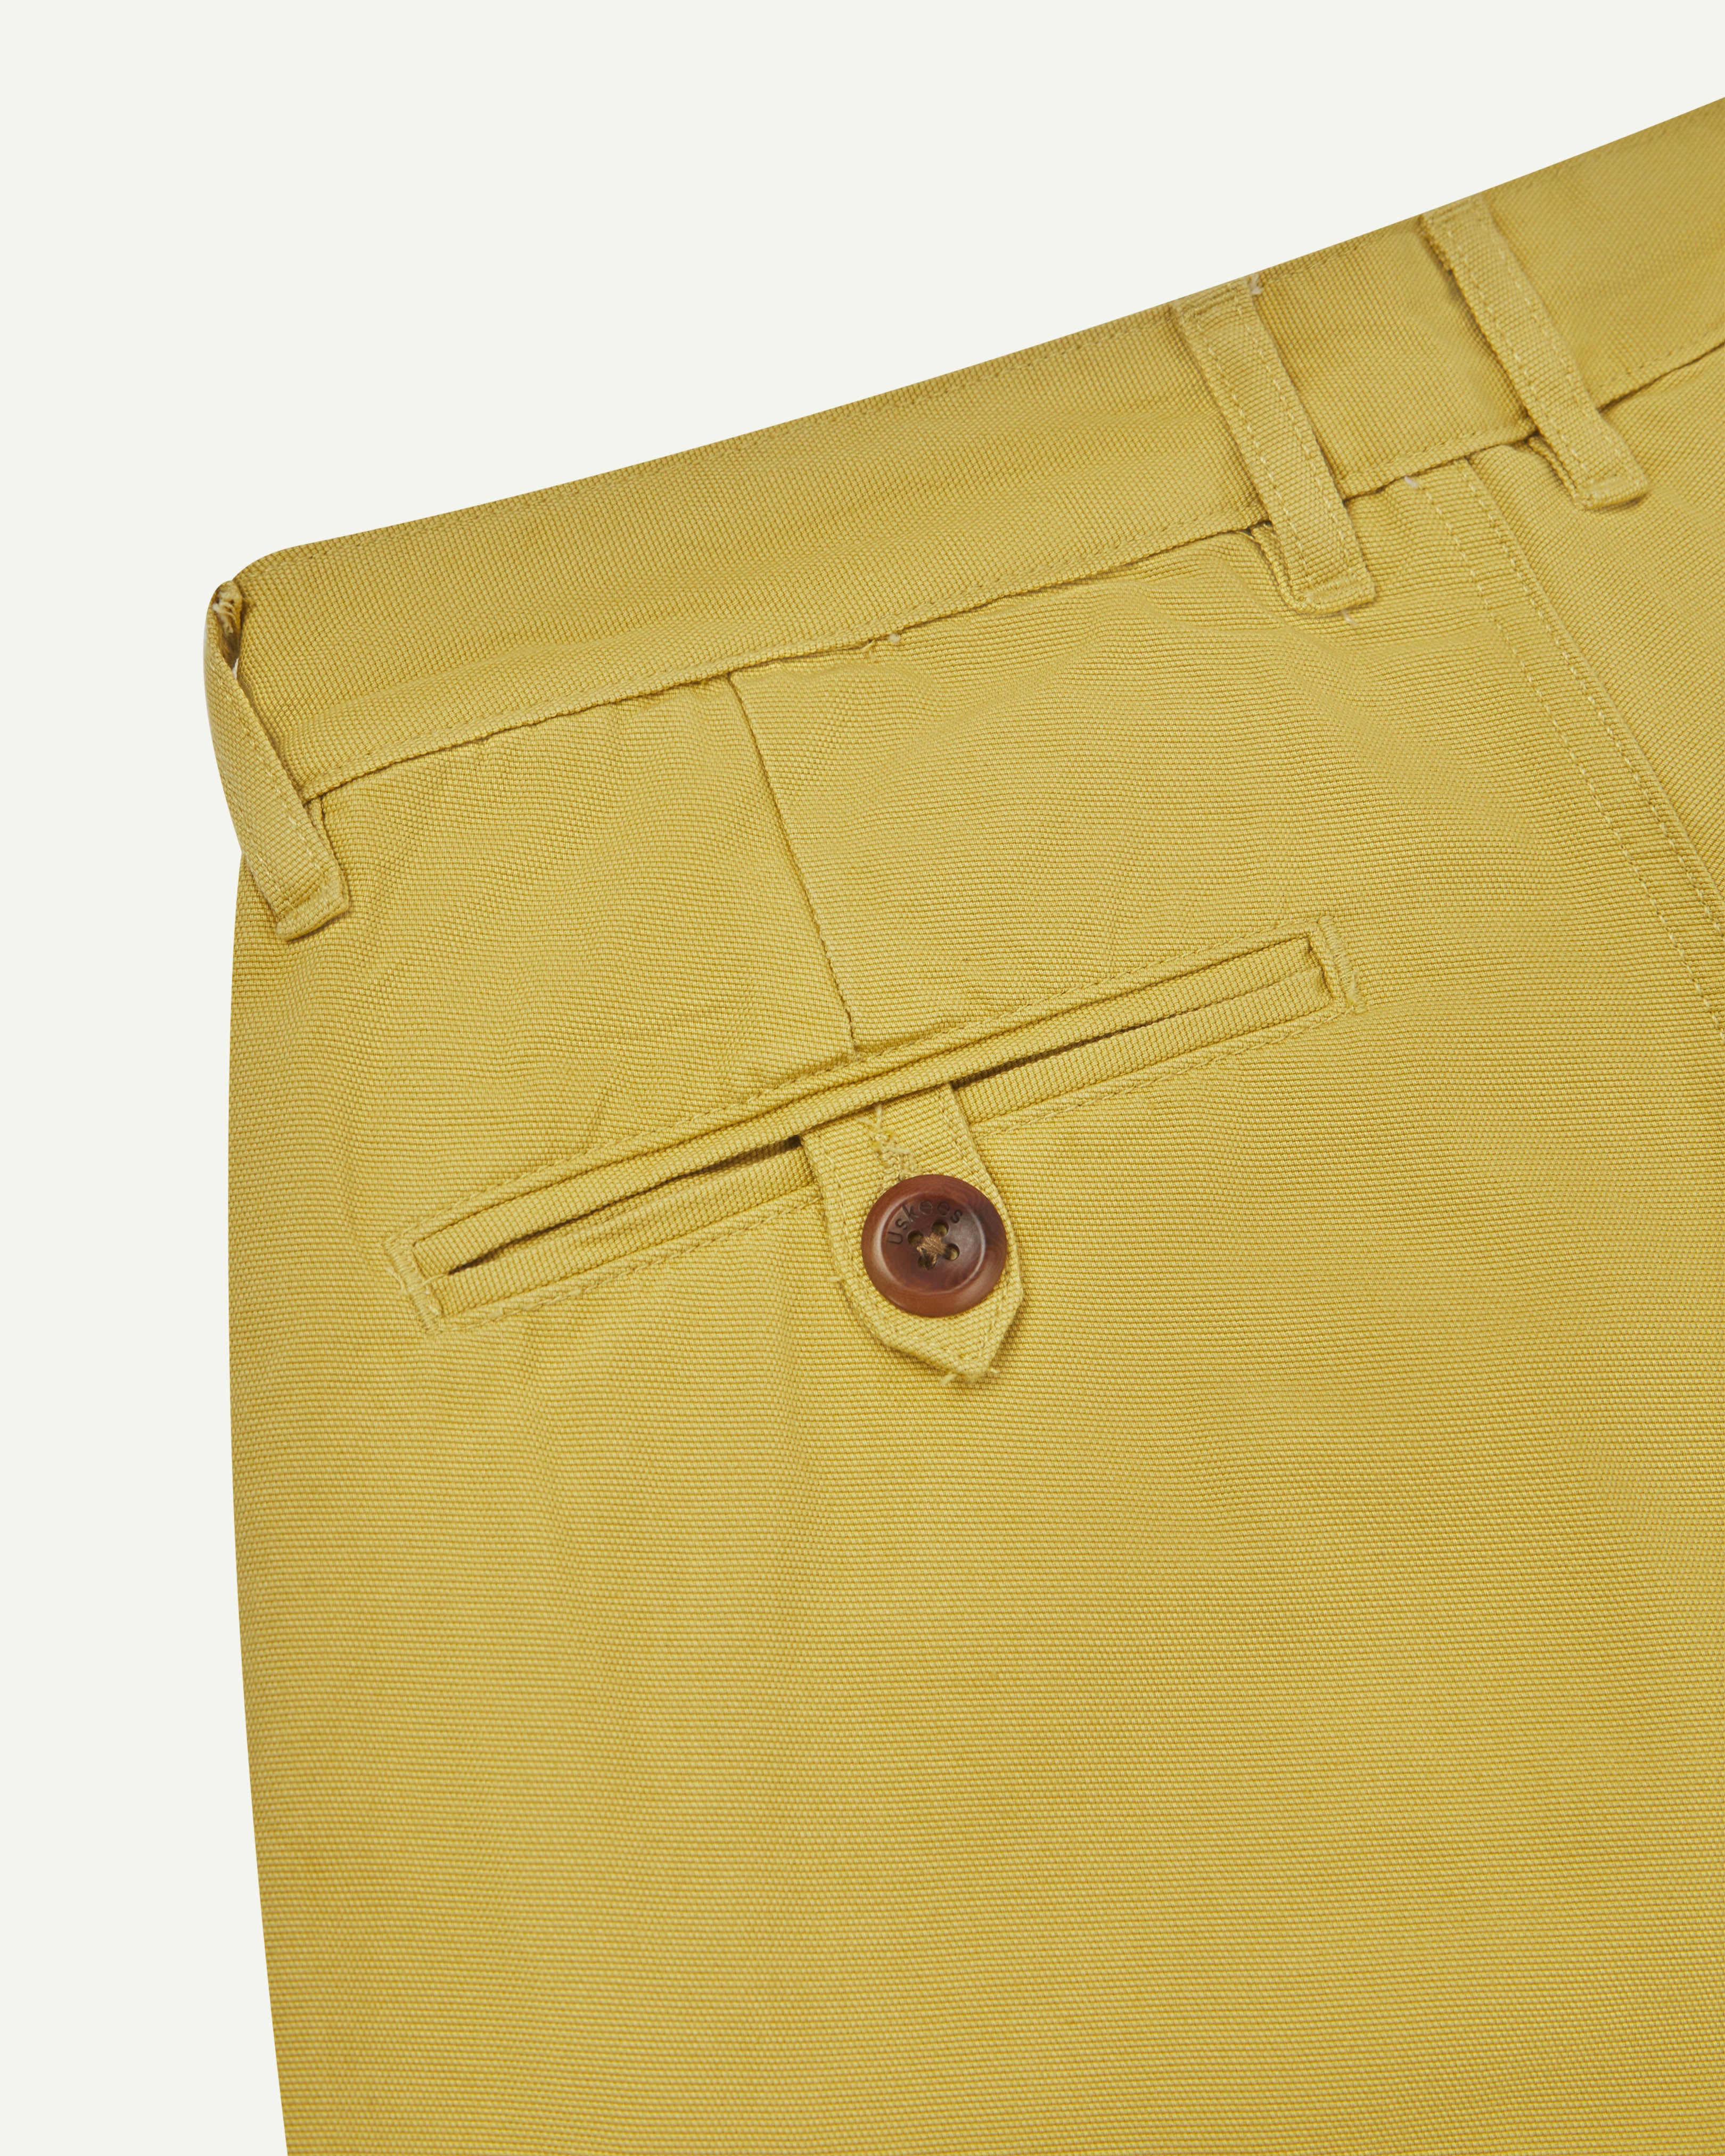 Back close-up view of #5018 Uskees men's organic mid-weight cotton boat trousers in acid yellow showing belt loops and buttoned back pocket.